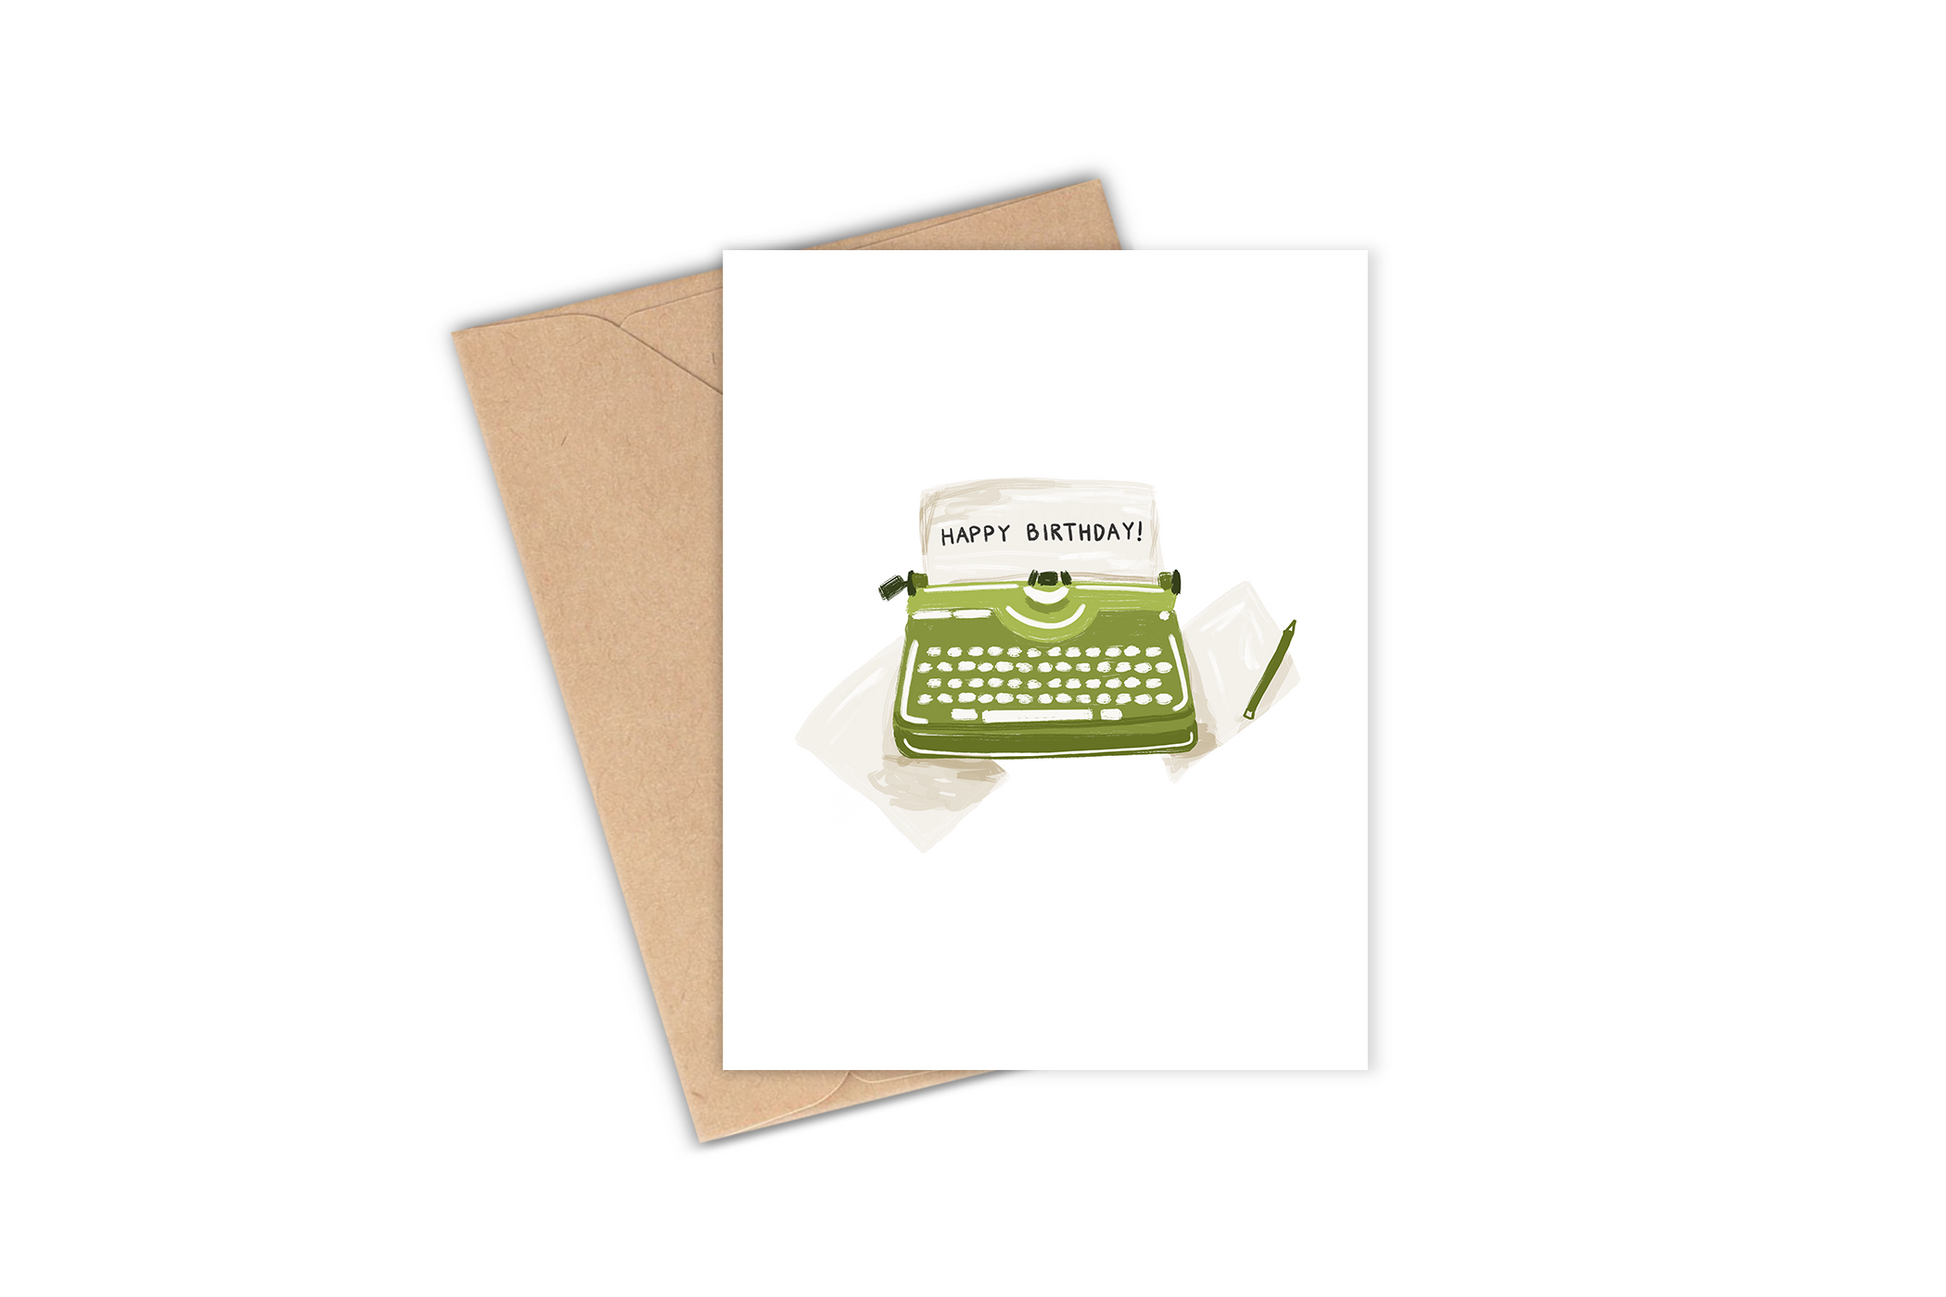 This greeting card features a drawing of a vintage looking typewriter with the phrase "Happy Birthday". Perfect for your friend who loves to write, read, or just loves retro things!